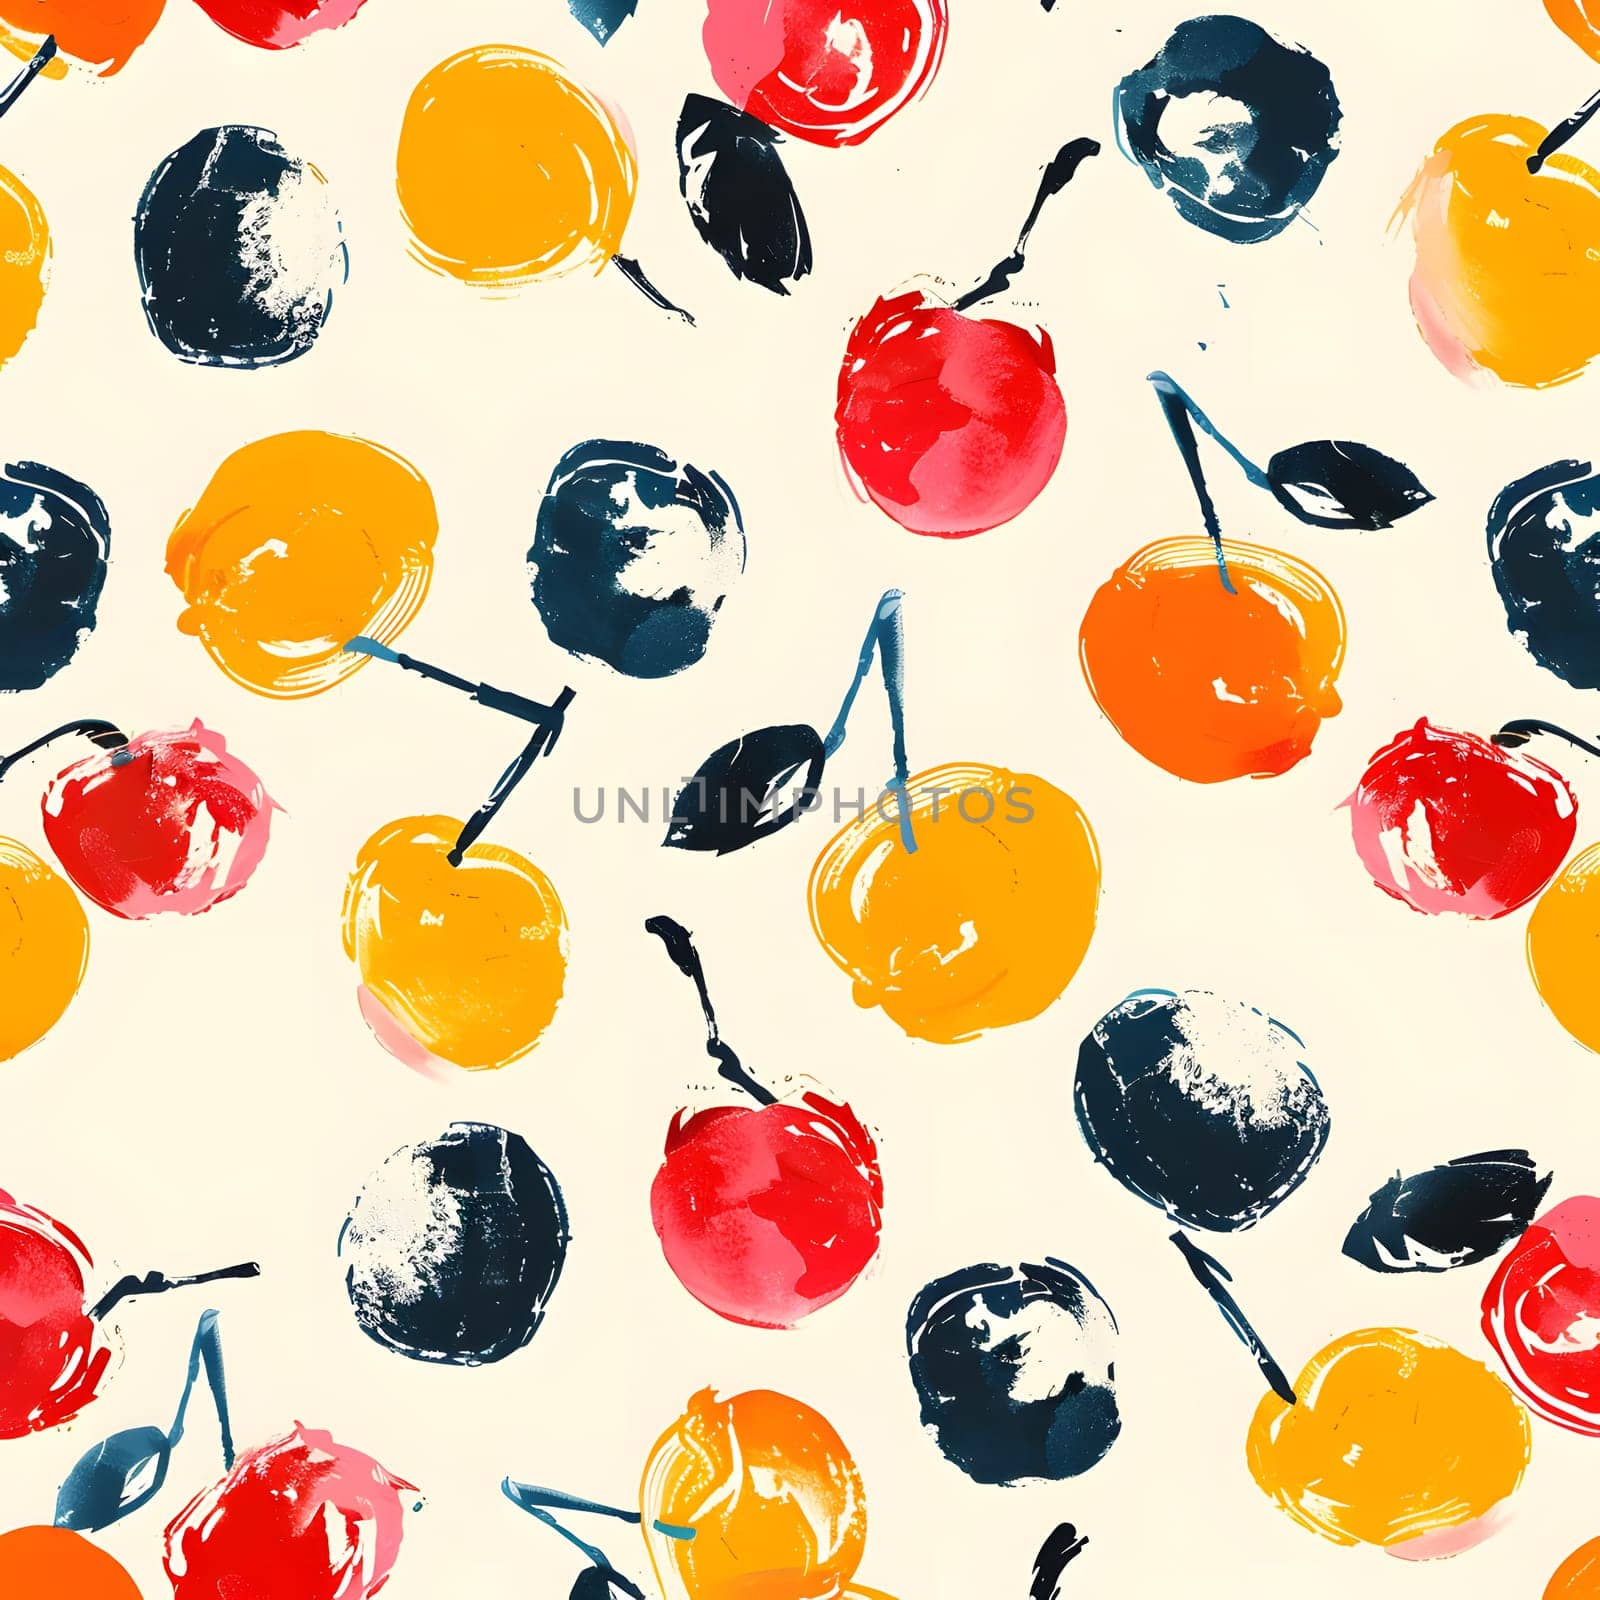 A vibrant orange, artful pattern of colorful cherries painted against a white background. This design combines elements of food, drawing, and fruit into a delightful art paint display